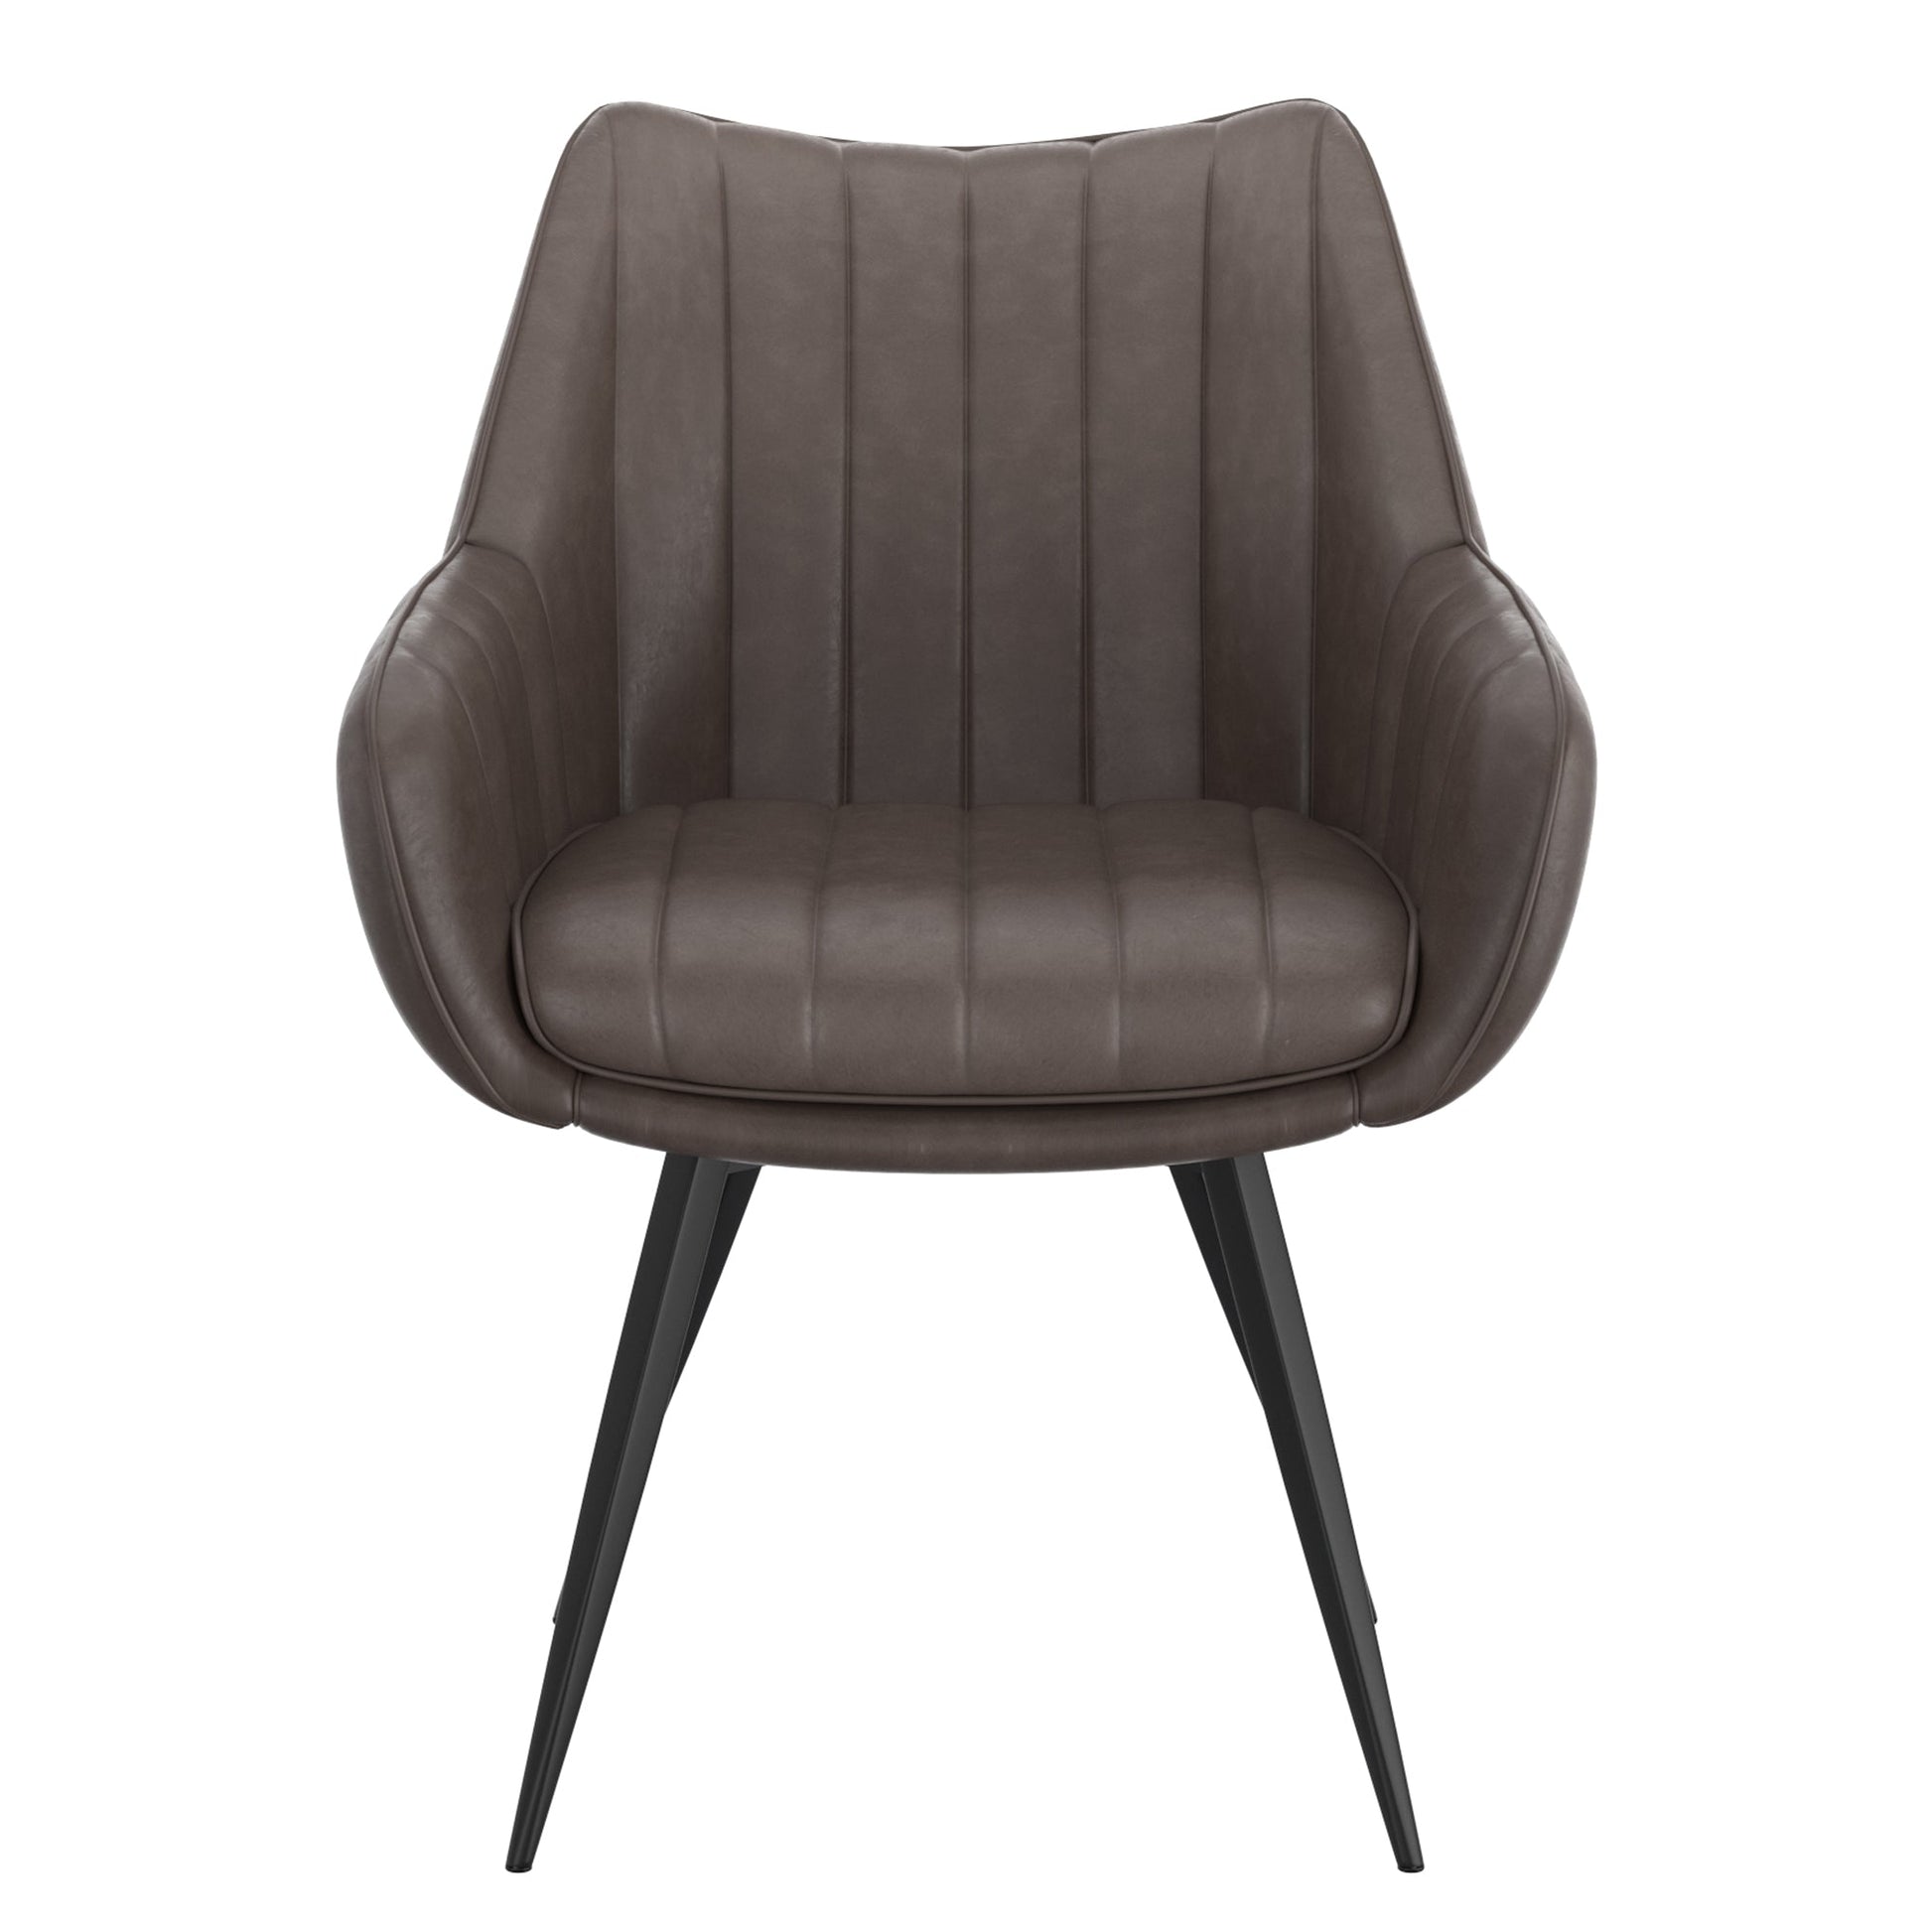 Swivel Dining Chairs | Set of 2 | Talon Grey Leather - Your Bar Stools Canada